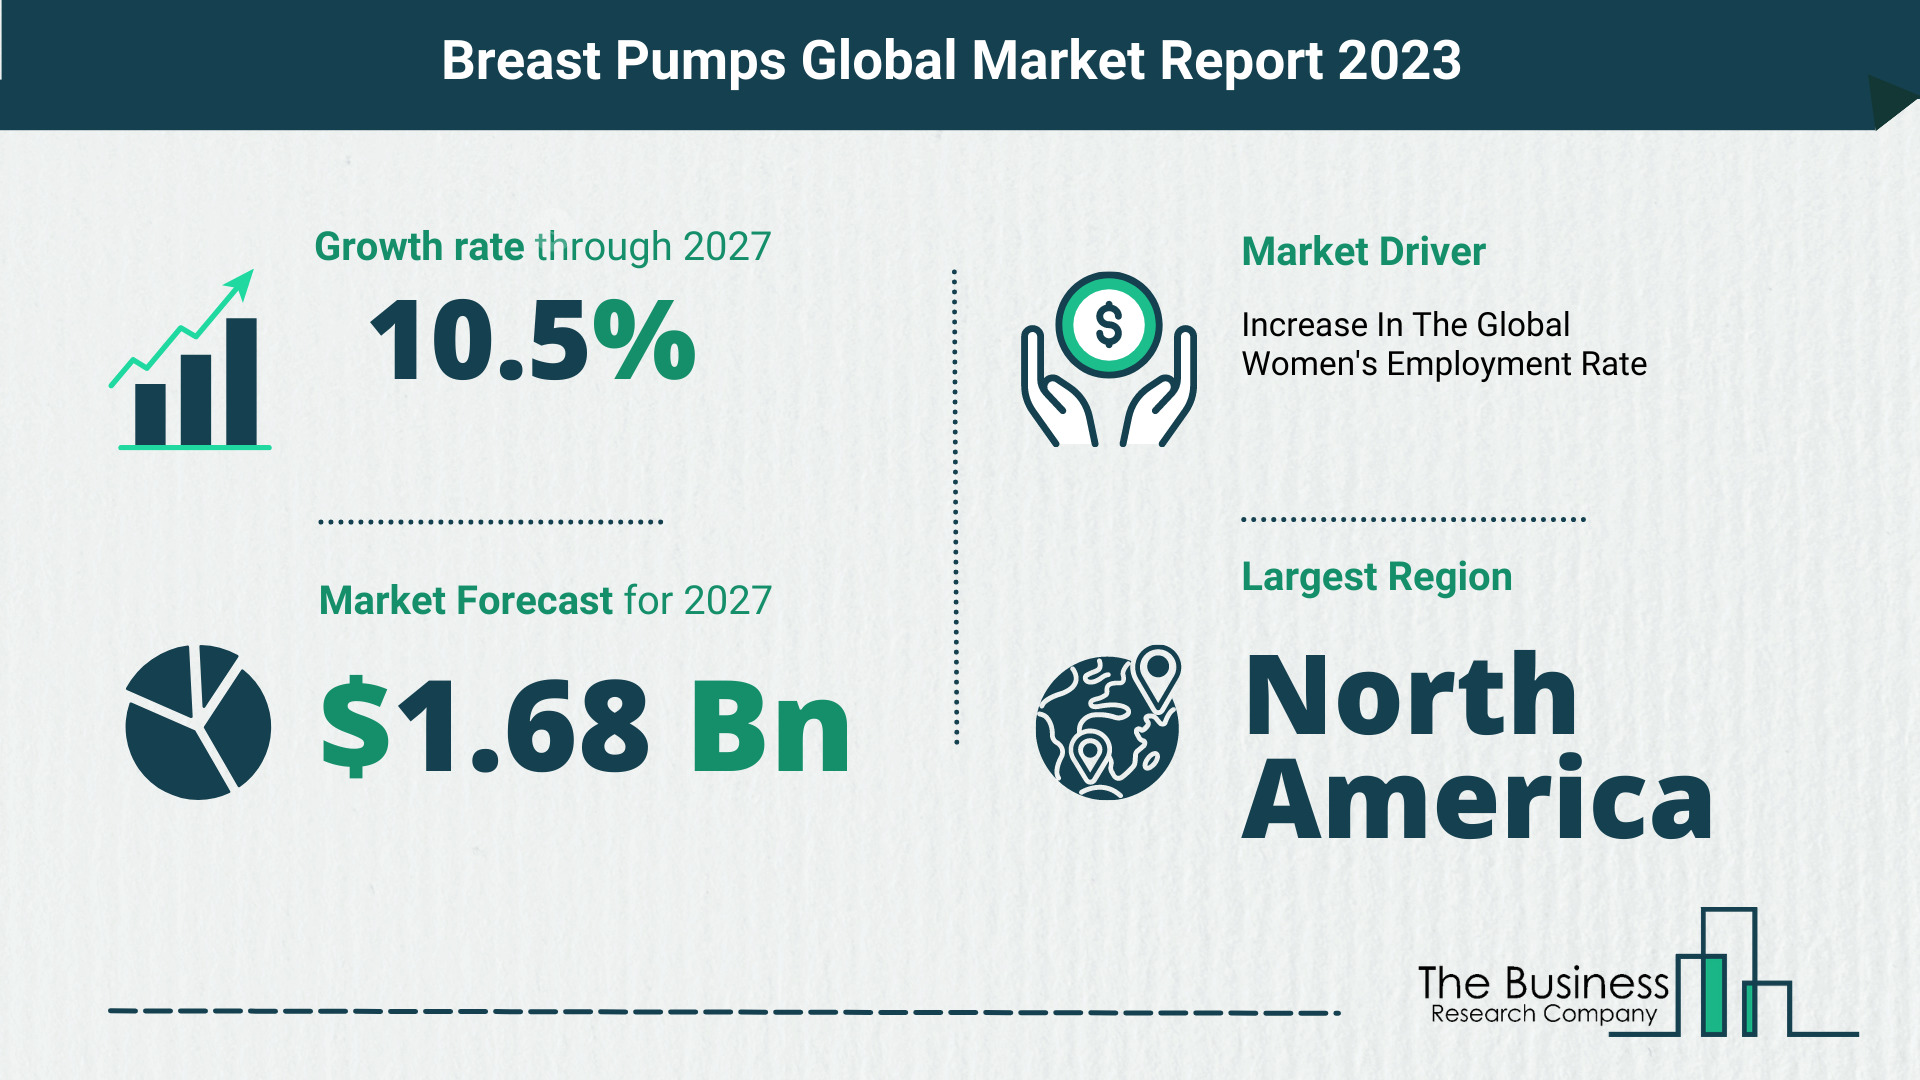 What Will The Breast Pumps Market Look Like In 2023?